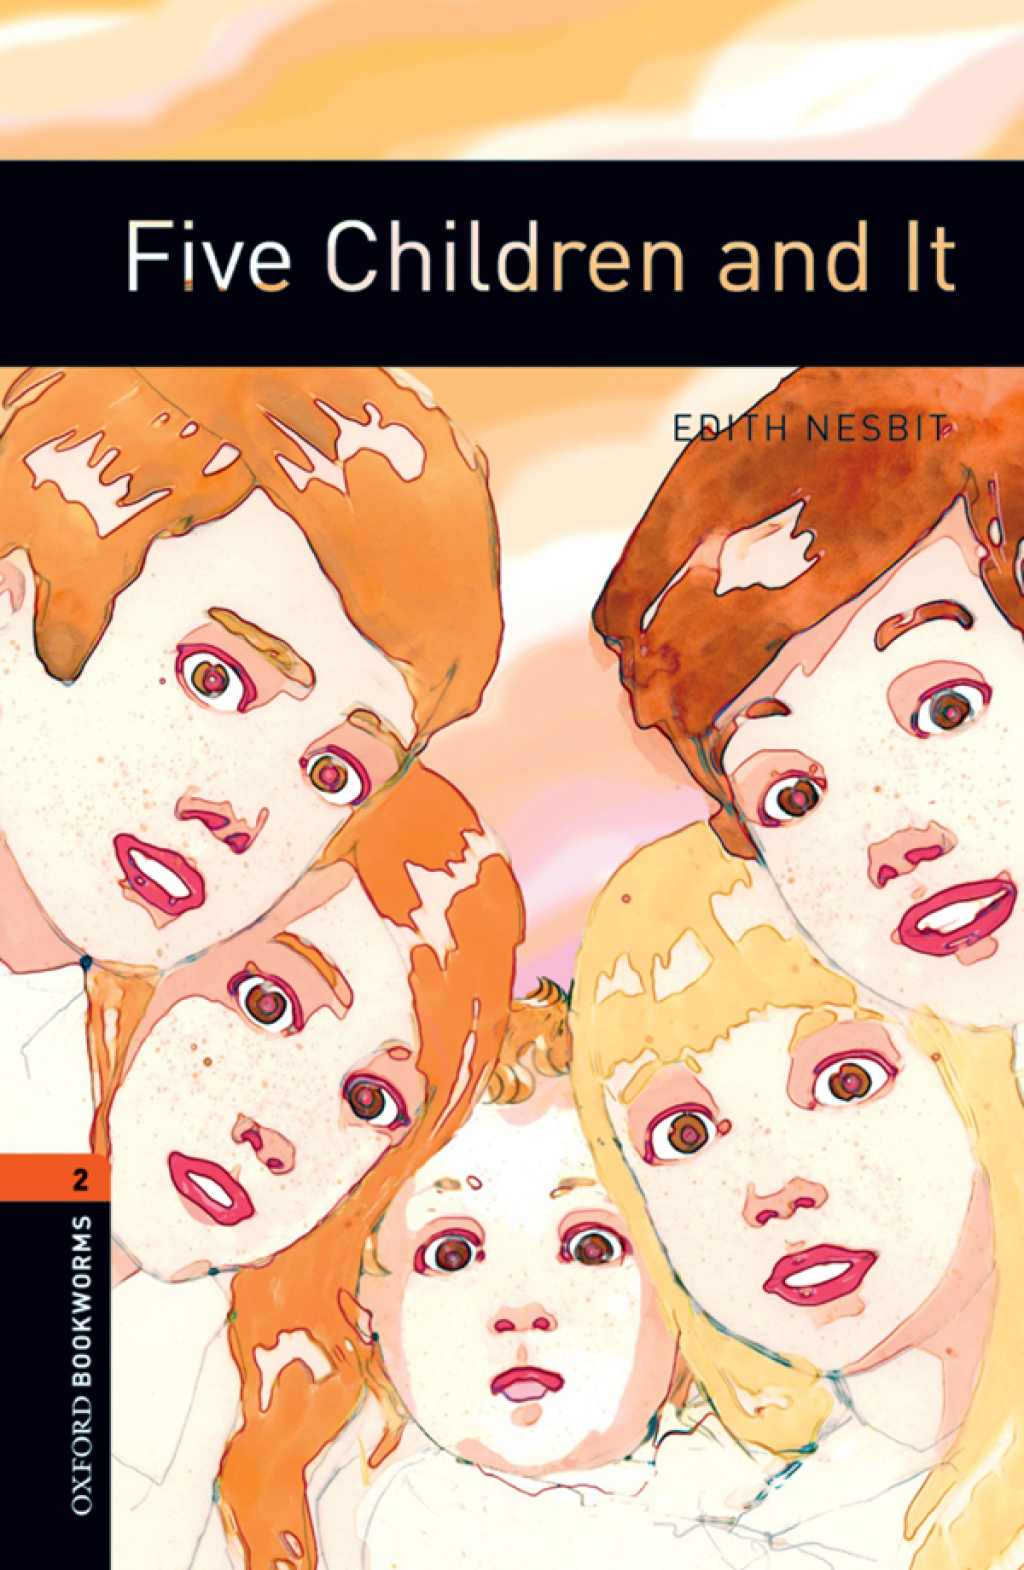 Five Children and It Level 2 Oxford Bookworms Library - 3rd Edition (eBook Rental)